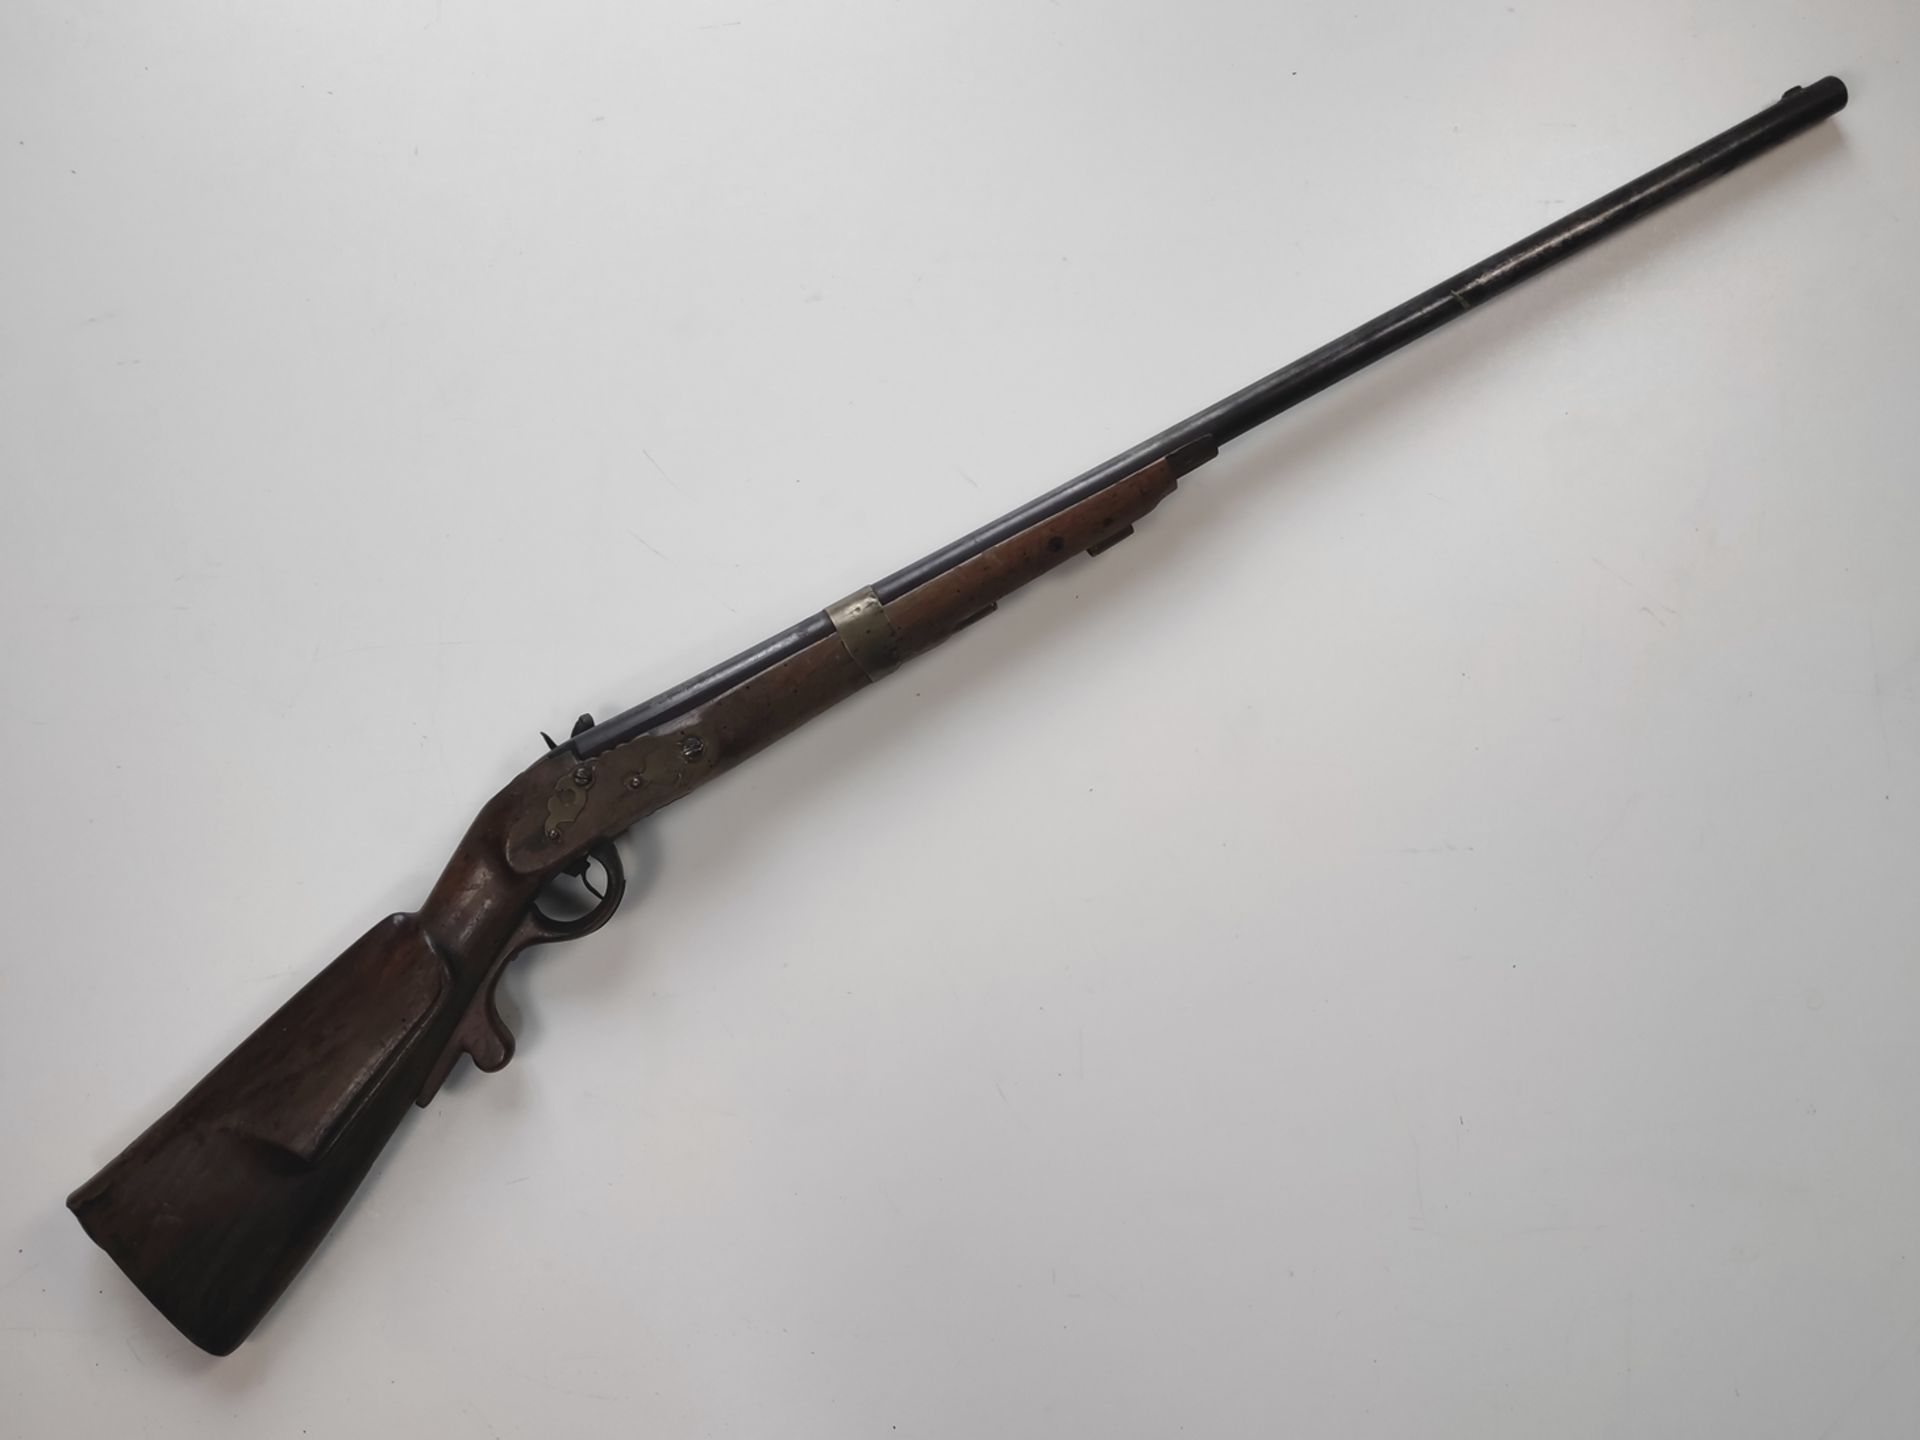 Muzzleloader with percussion for left-handers, semi-stocked, length 118cm - Image 2 of 2